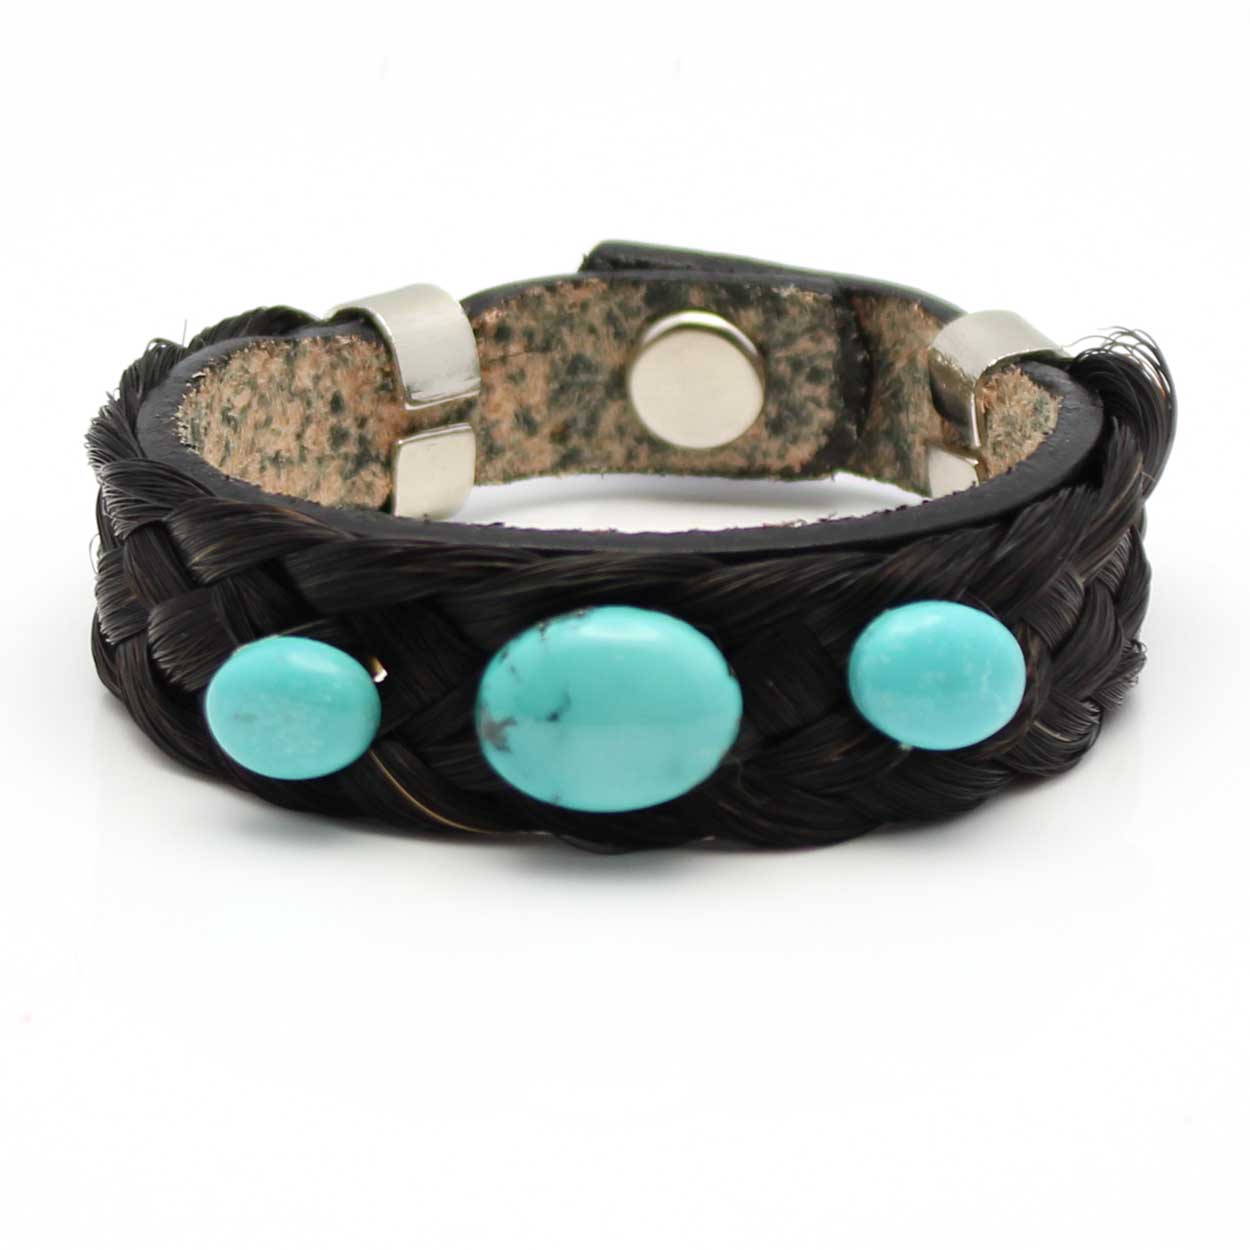 Black Braided Horse Hair Bracelet With Turquoise